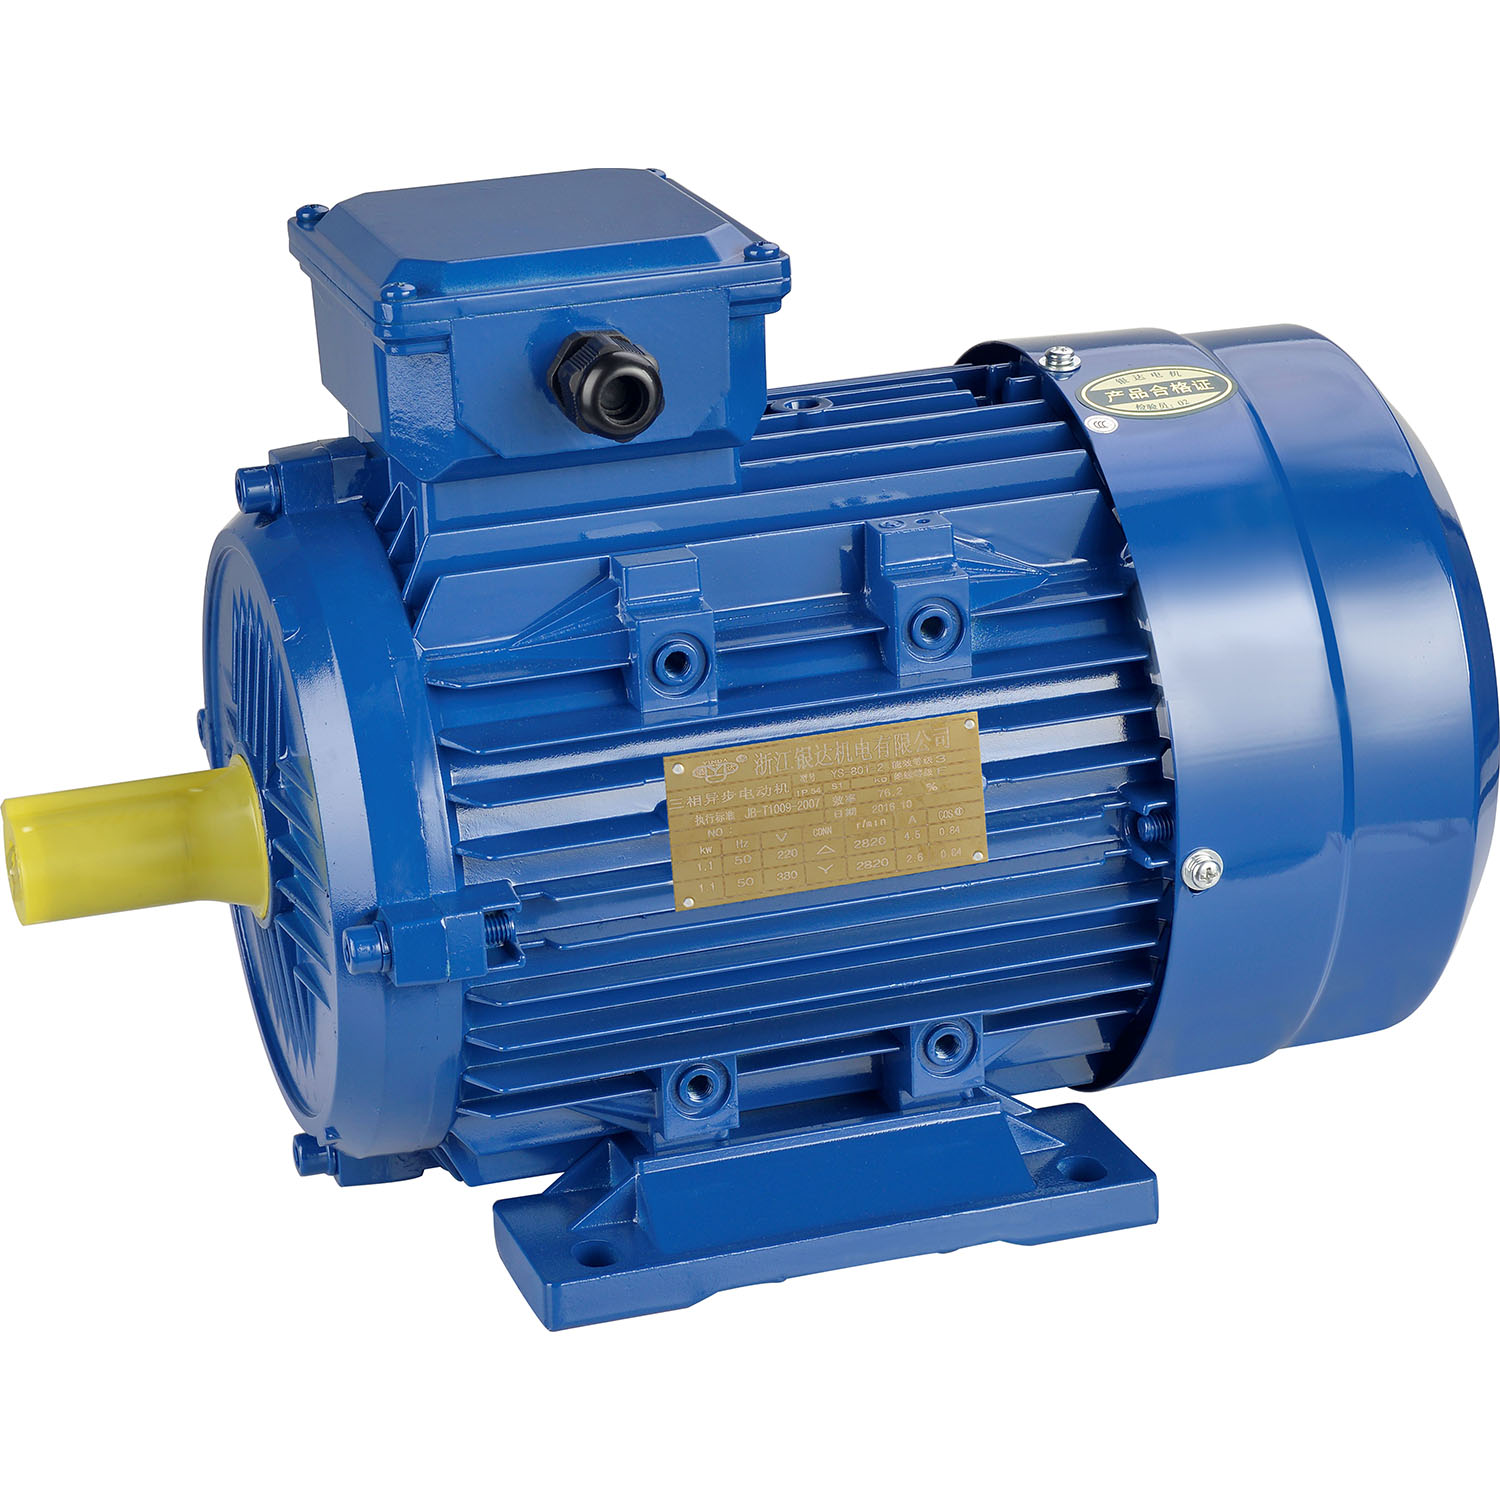 YS-711-6 0.18KW 0.25HP aluminum cylinder series high efficiency three-phase asynchronous motor